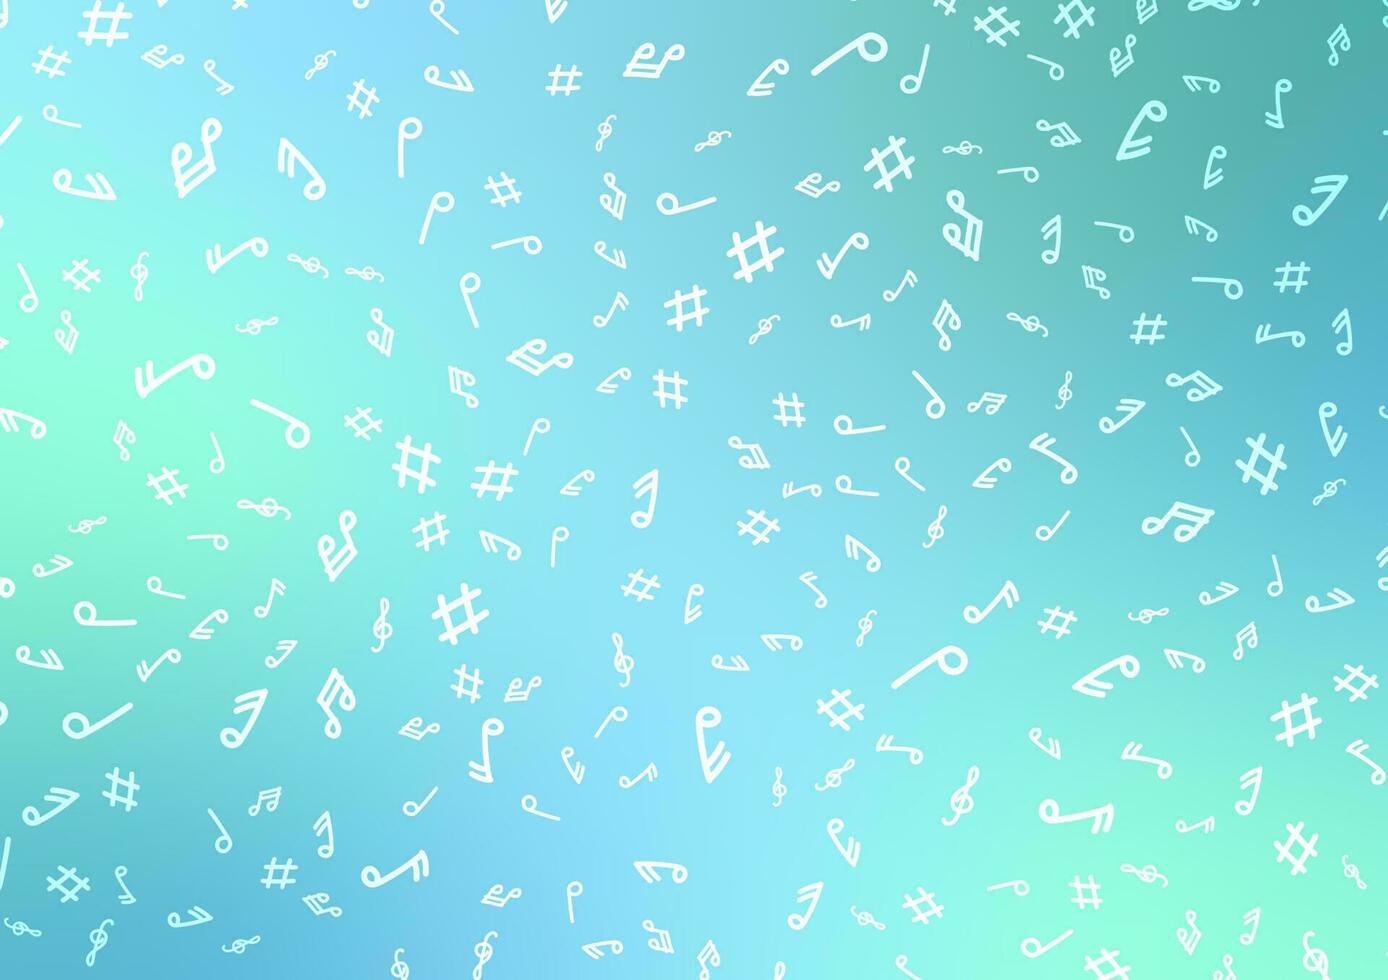 Random music note song melody blue gradient pattern background vector